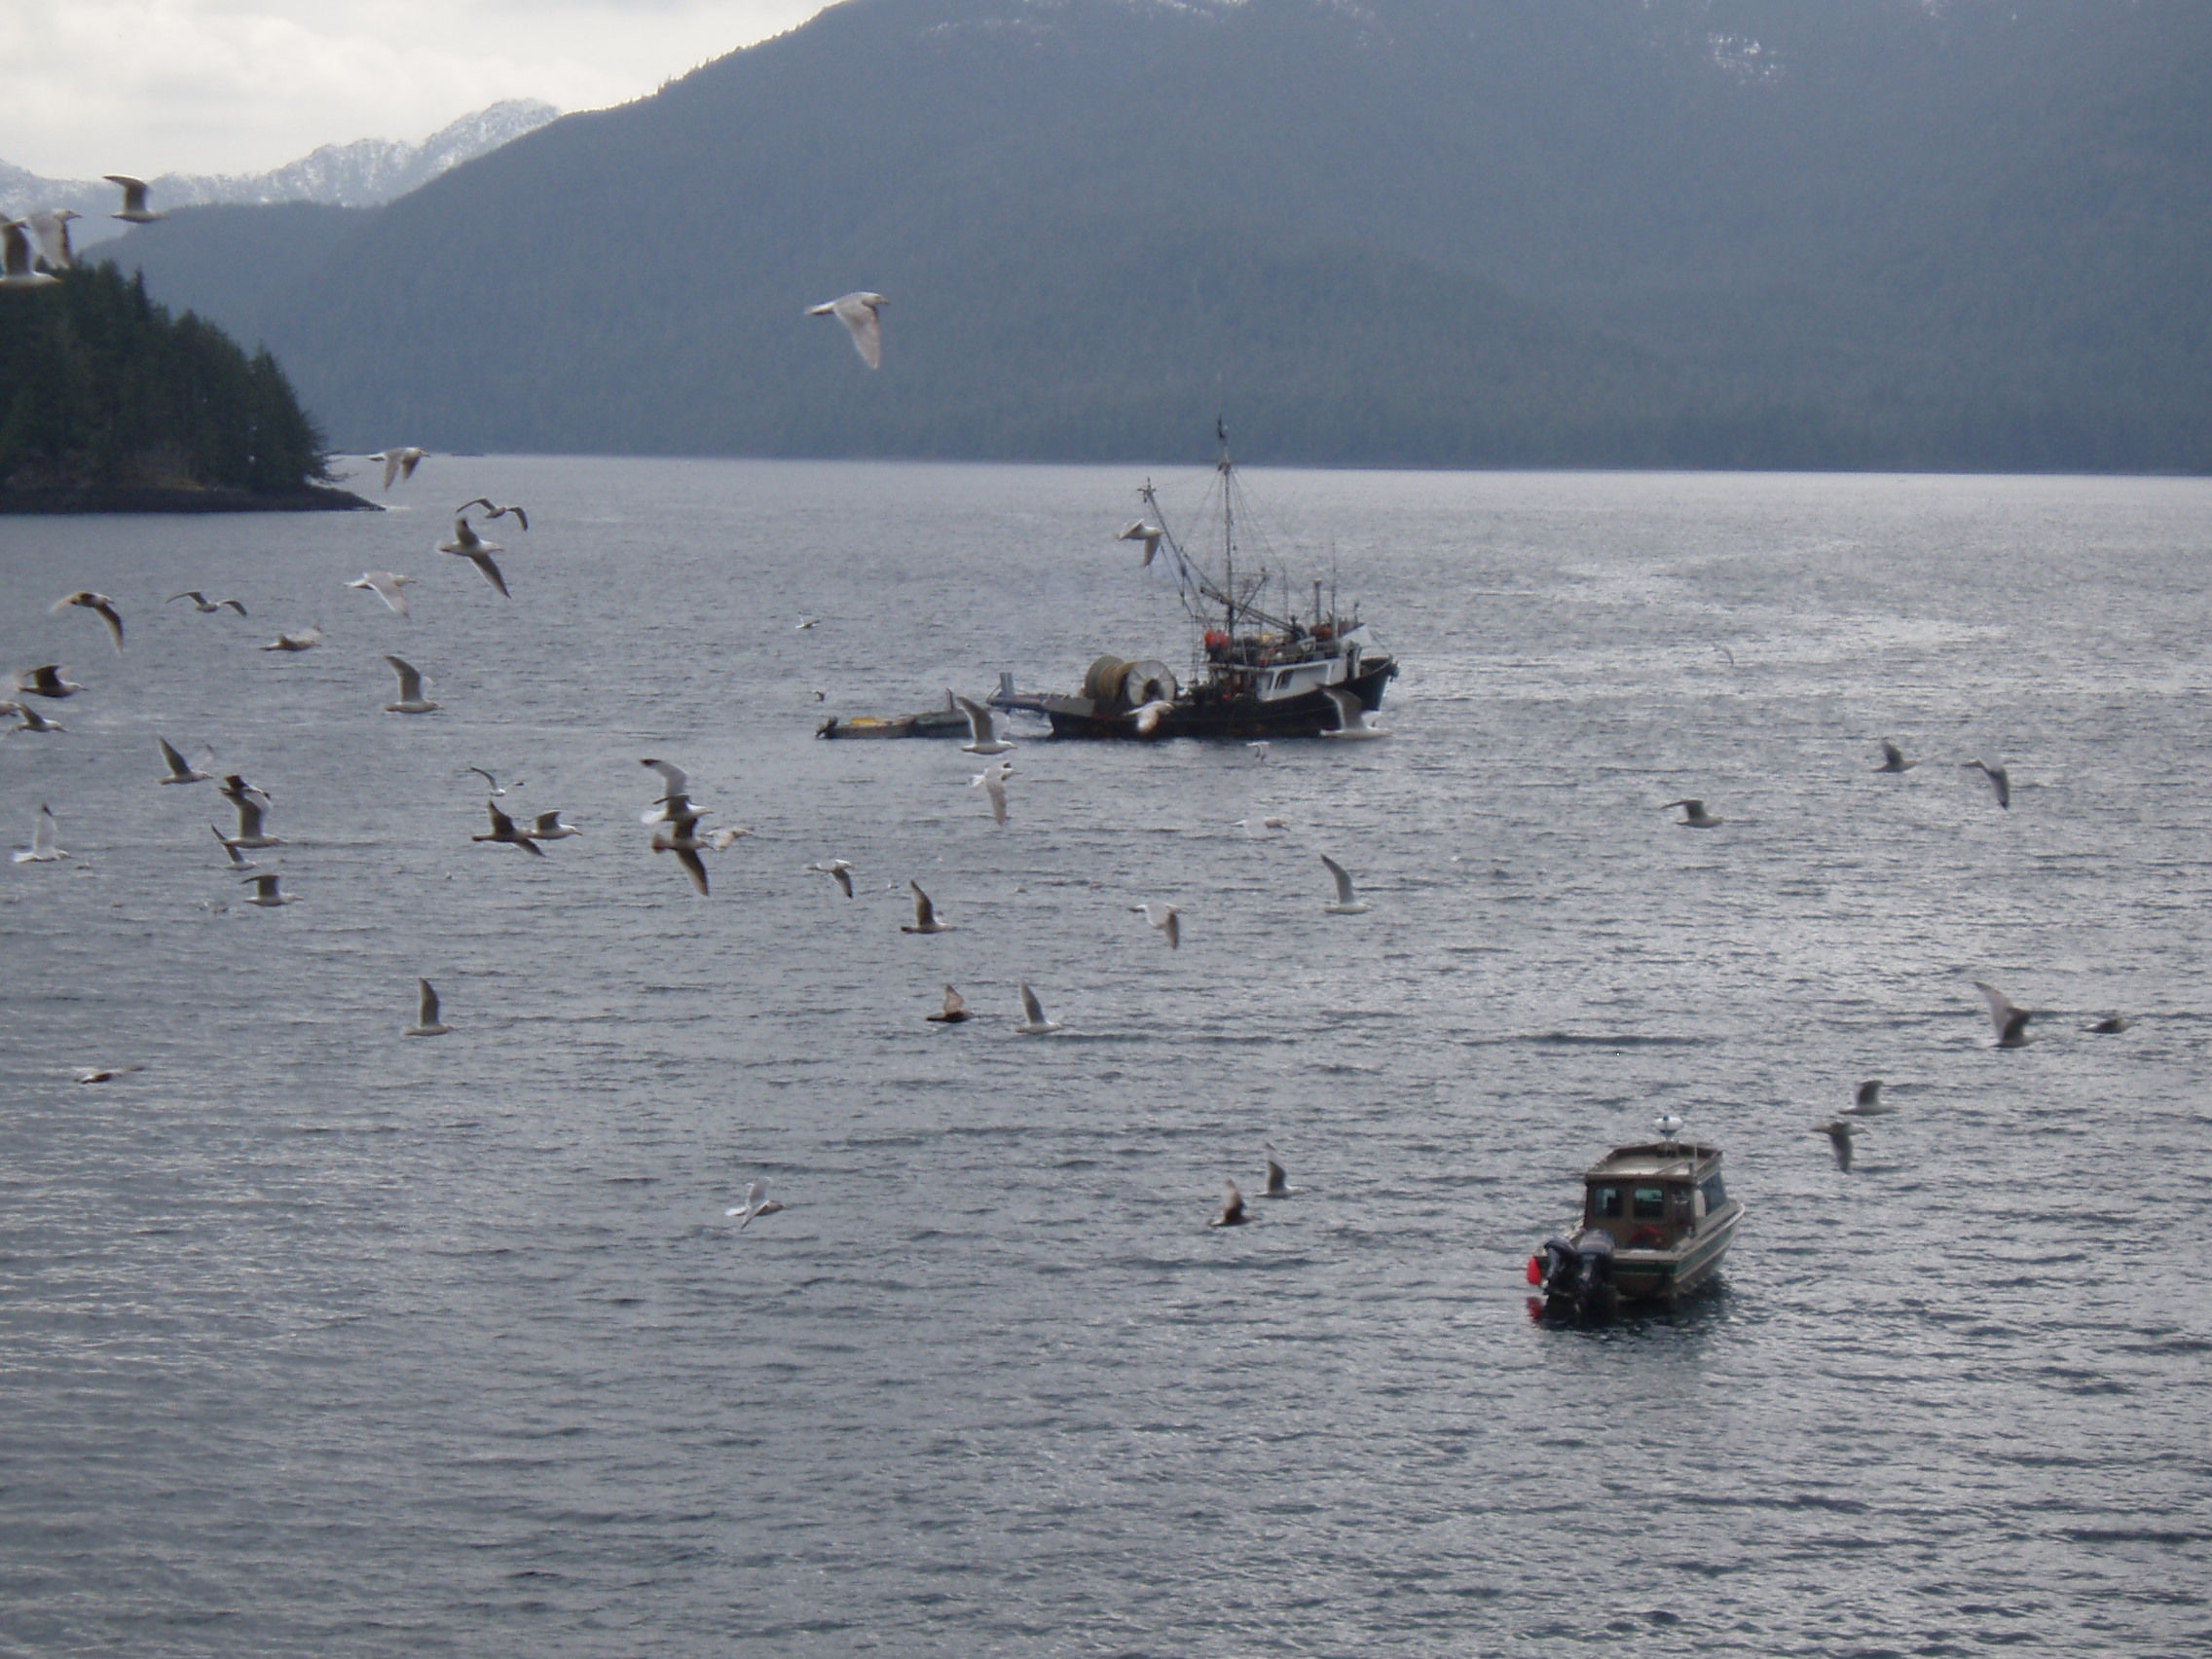 Two boats on the water, a flock of seagulls swarms